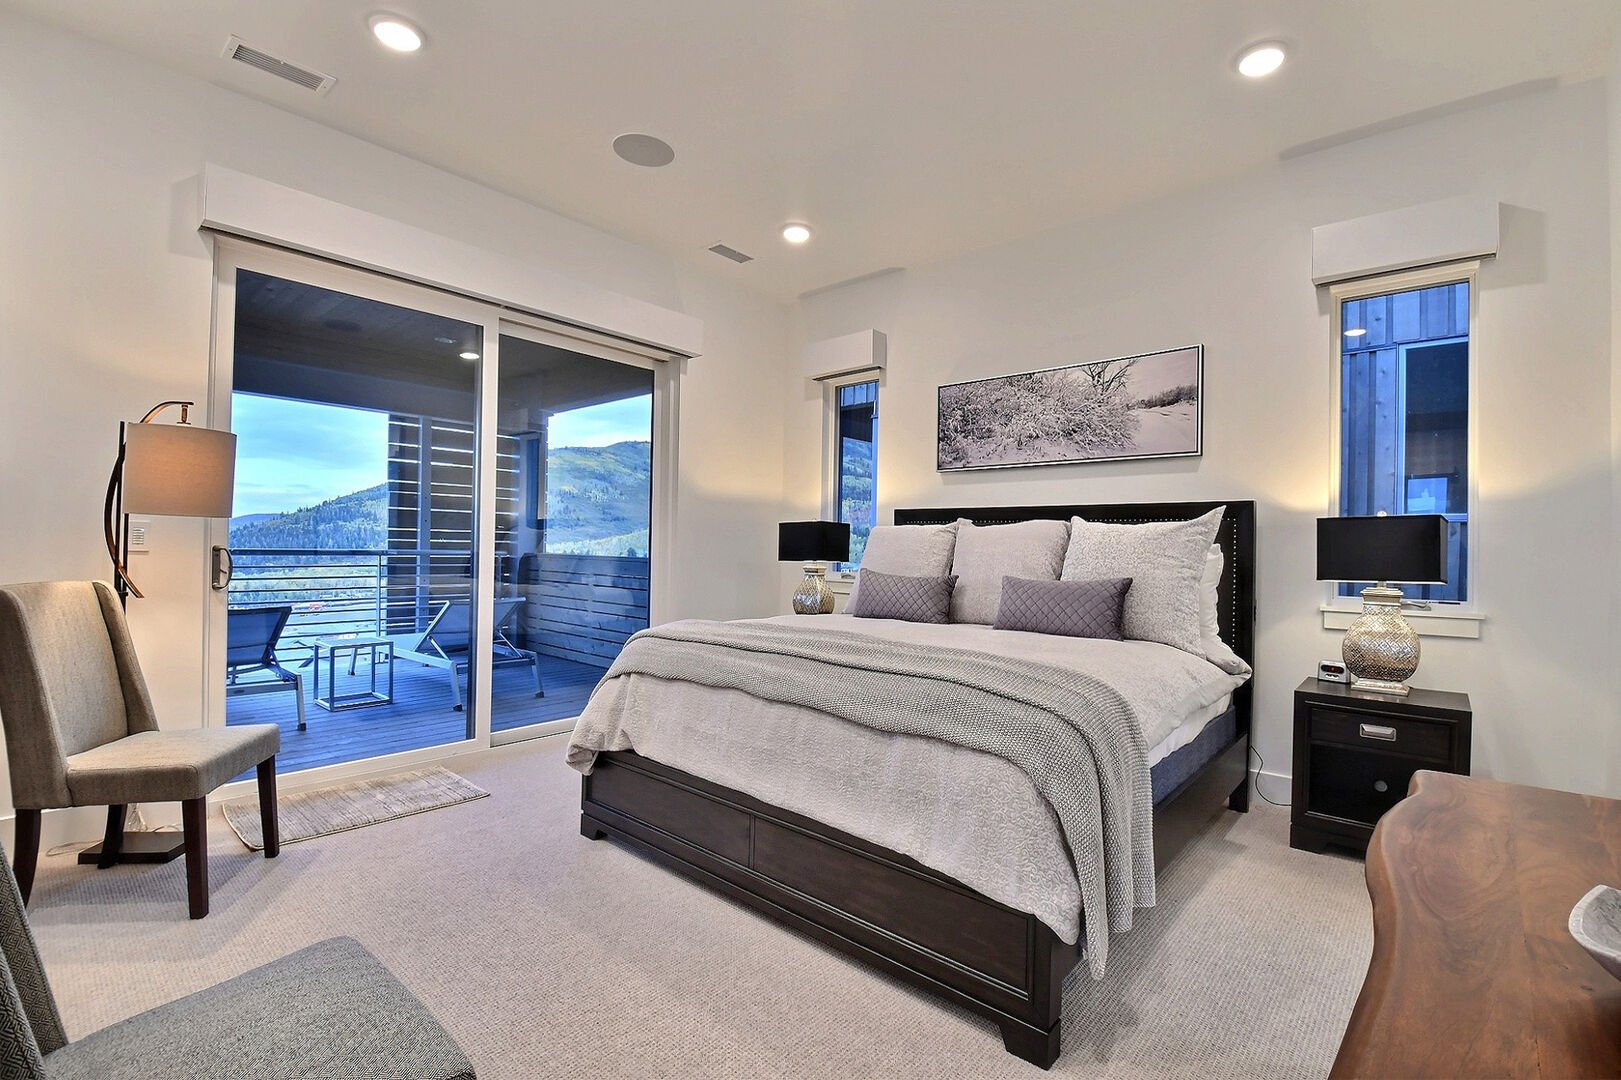 Master bedroom with private balcony.